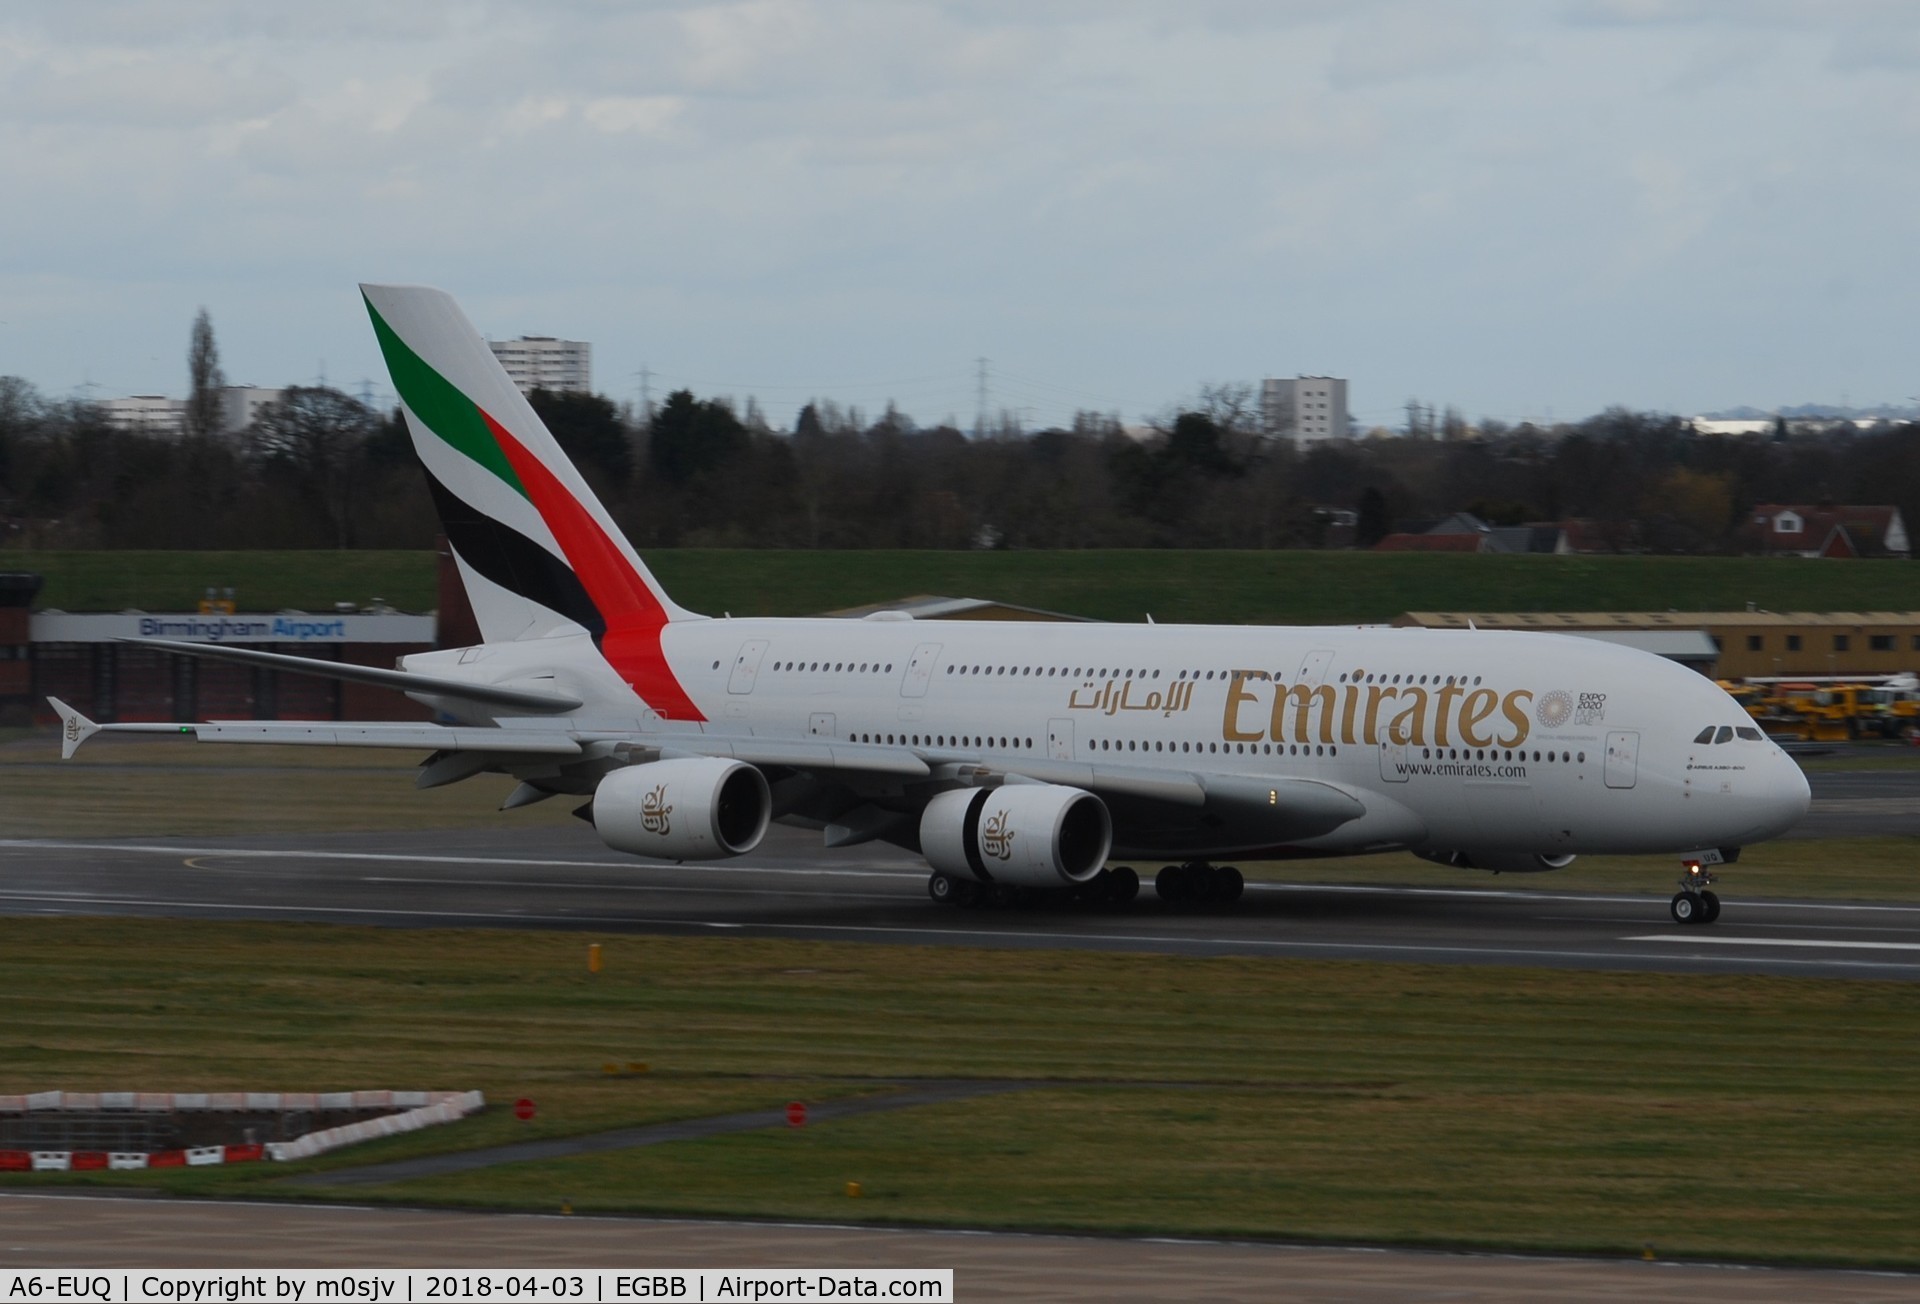 A6-EUQ, 2016 Airbus A380-842 C/N 229, Taken from Freeport carpark